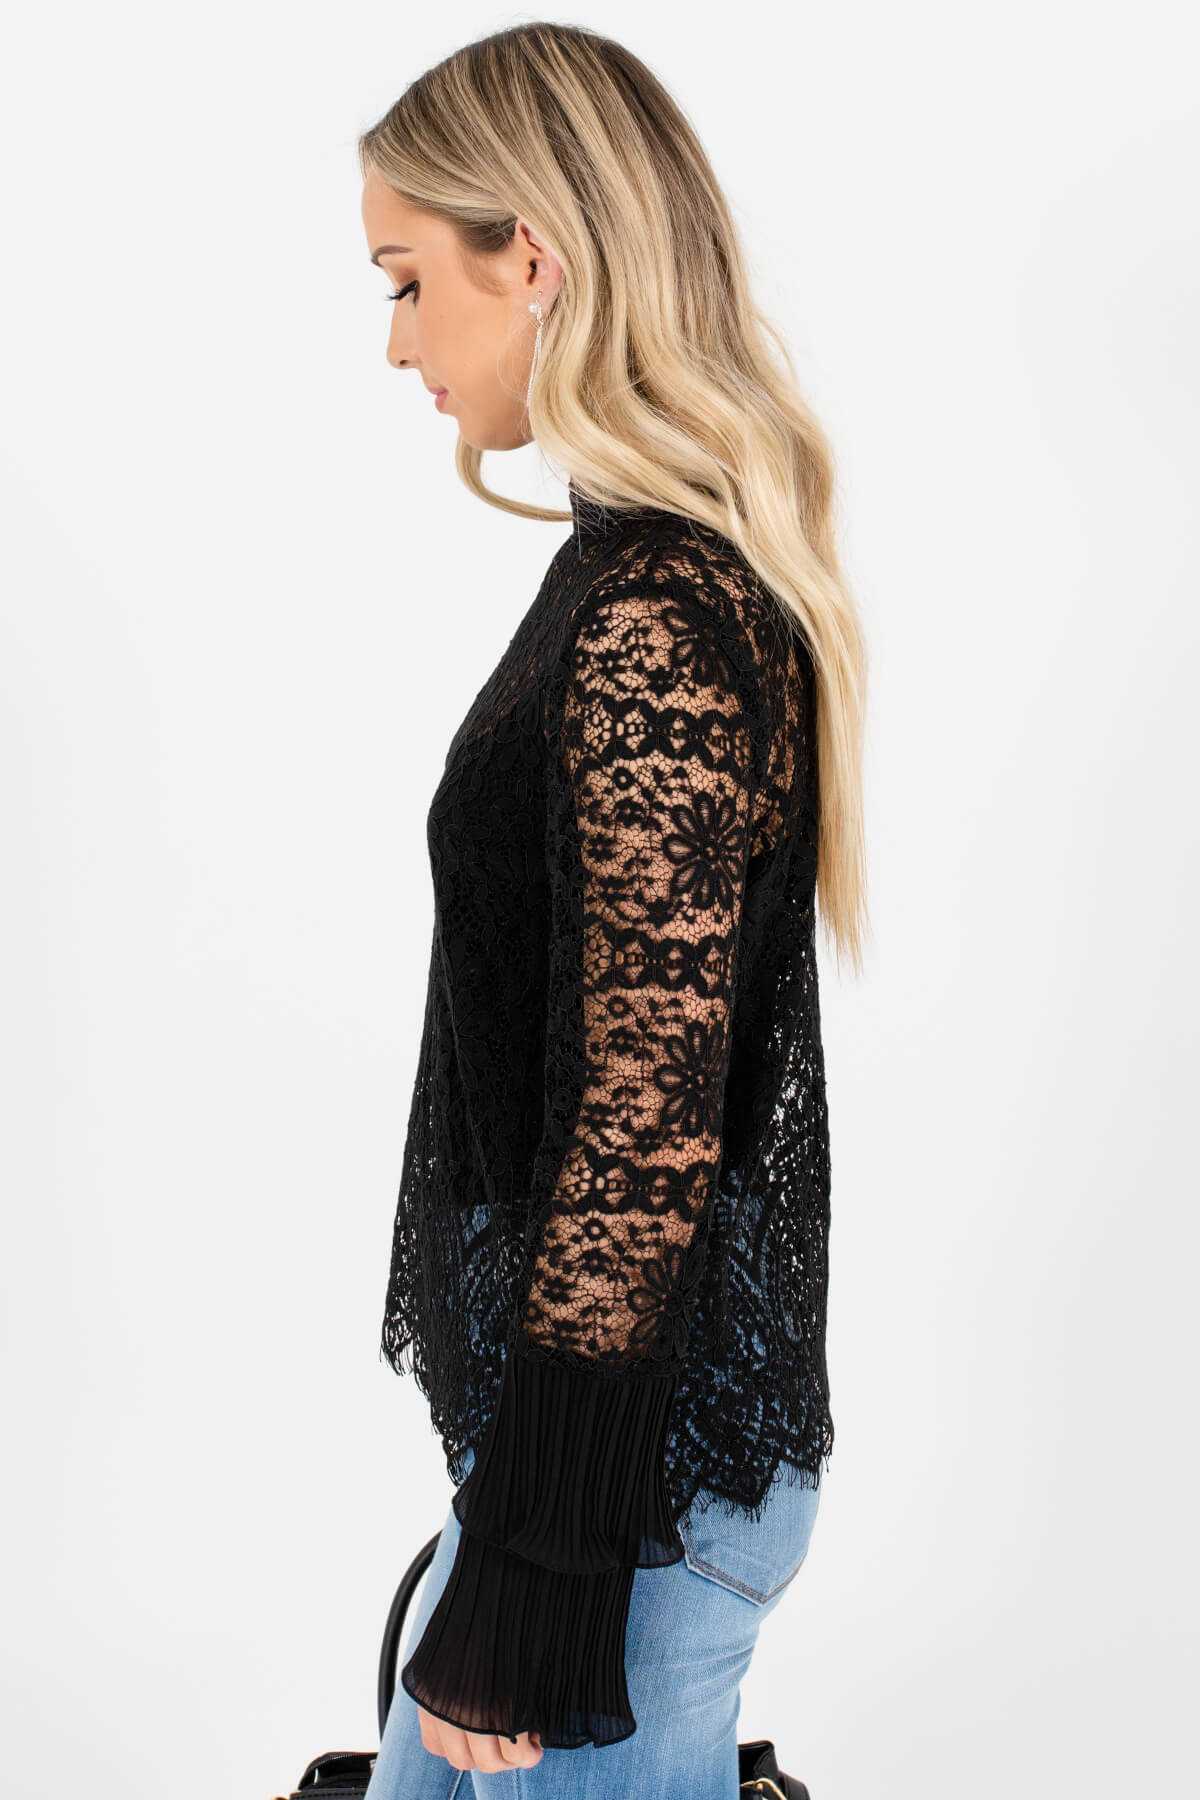 All Dressed Up Black Lace Top